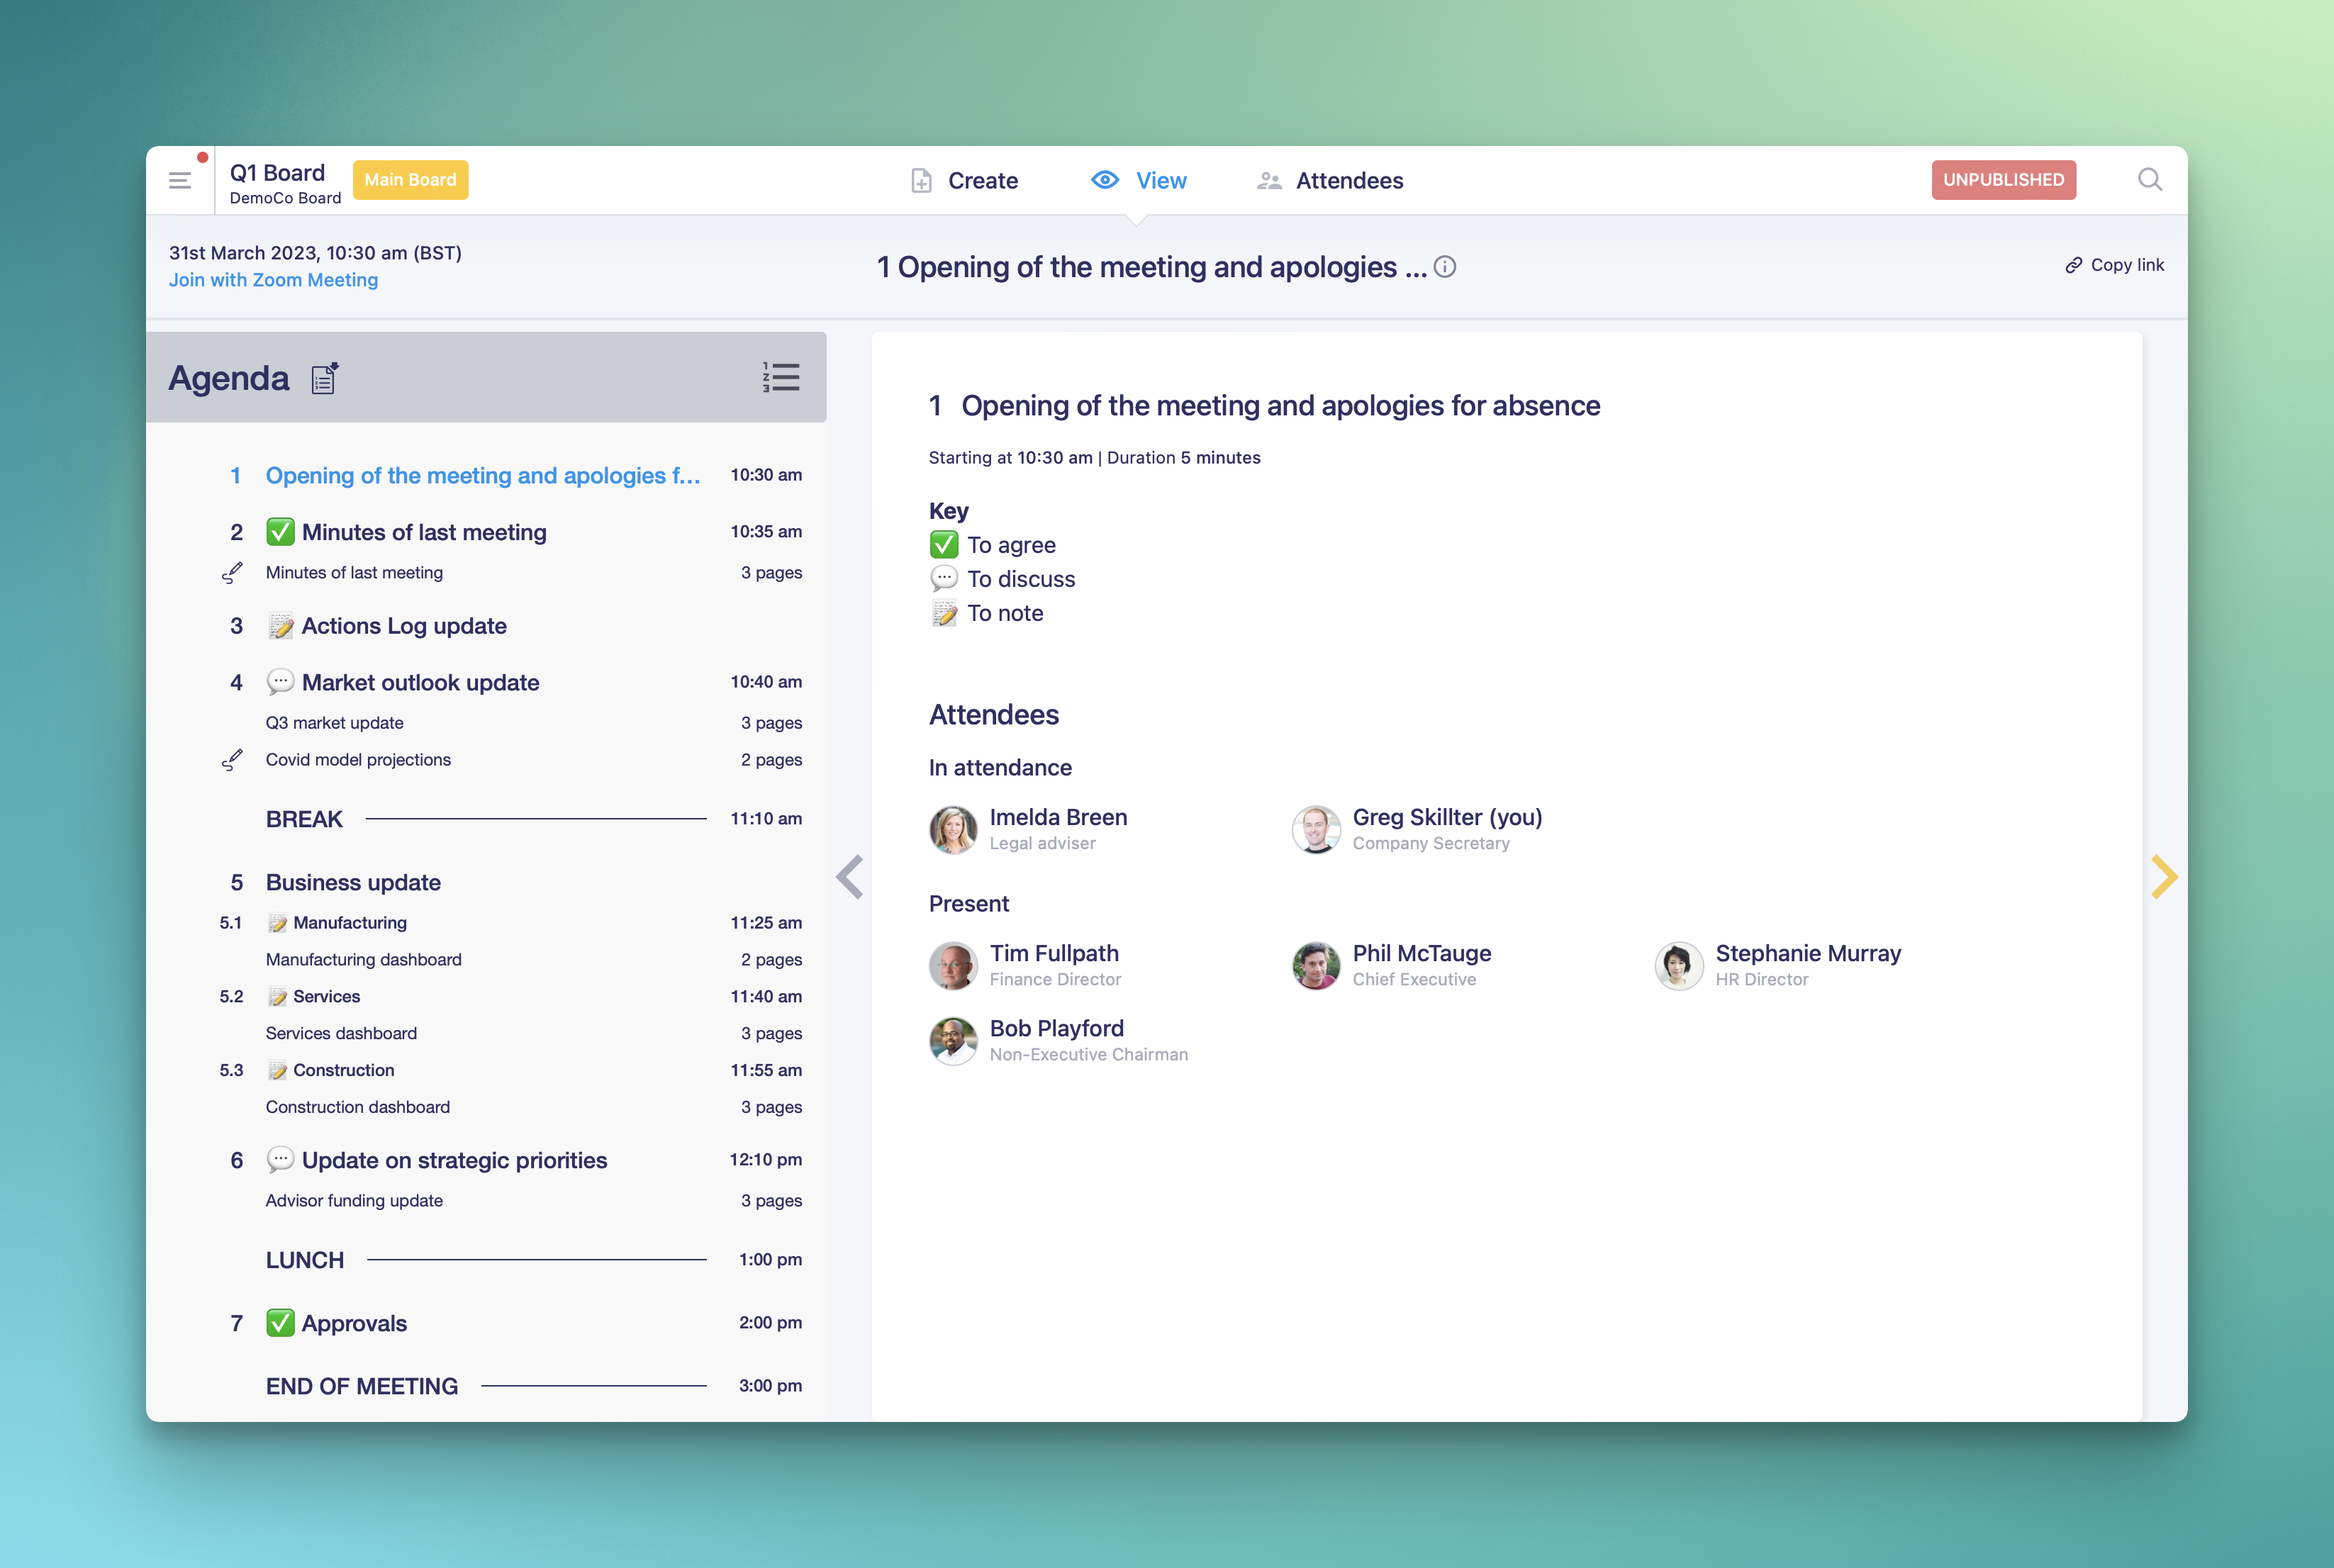 Meeting packs: Knowa delivers a powerful and accessible meeting pack builder and viewer, with annotations, bookmarks, custom reading modes, offline capability and more